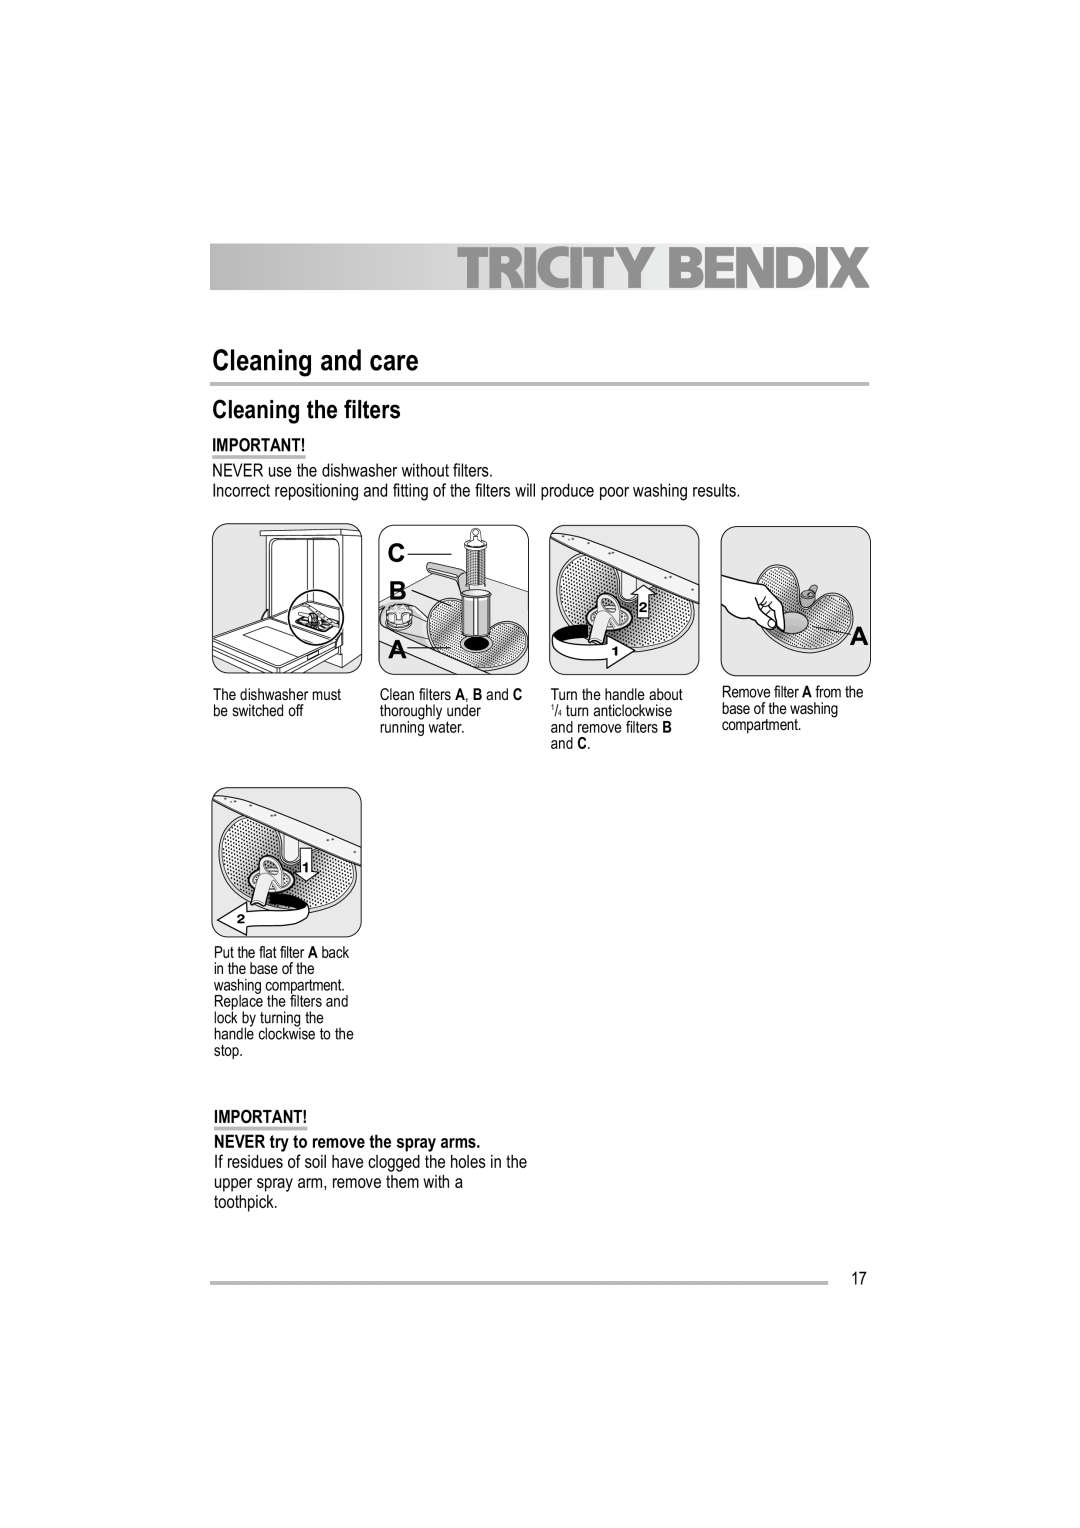 Tricity Bendix TBDW 32 manual Cleaning and care, Cleaning the filters 